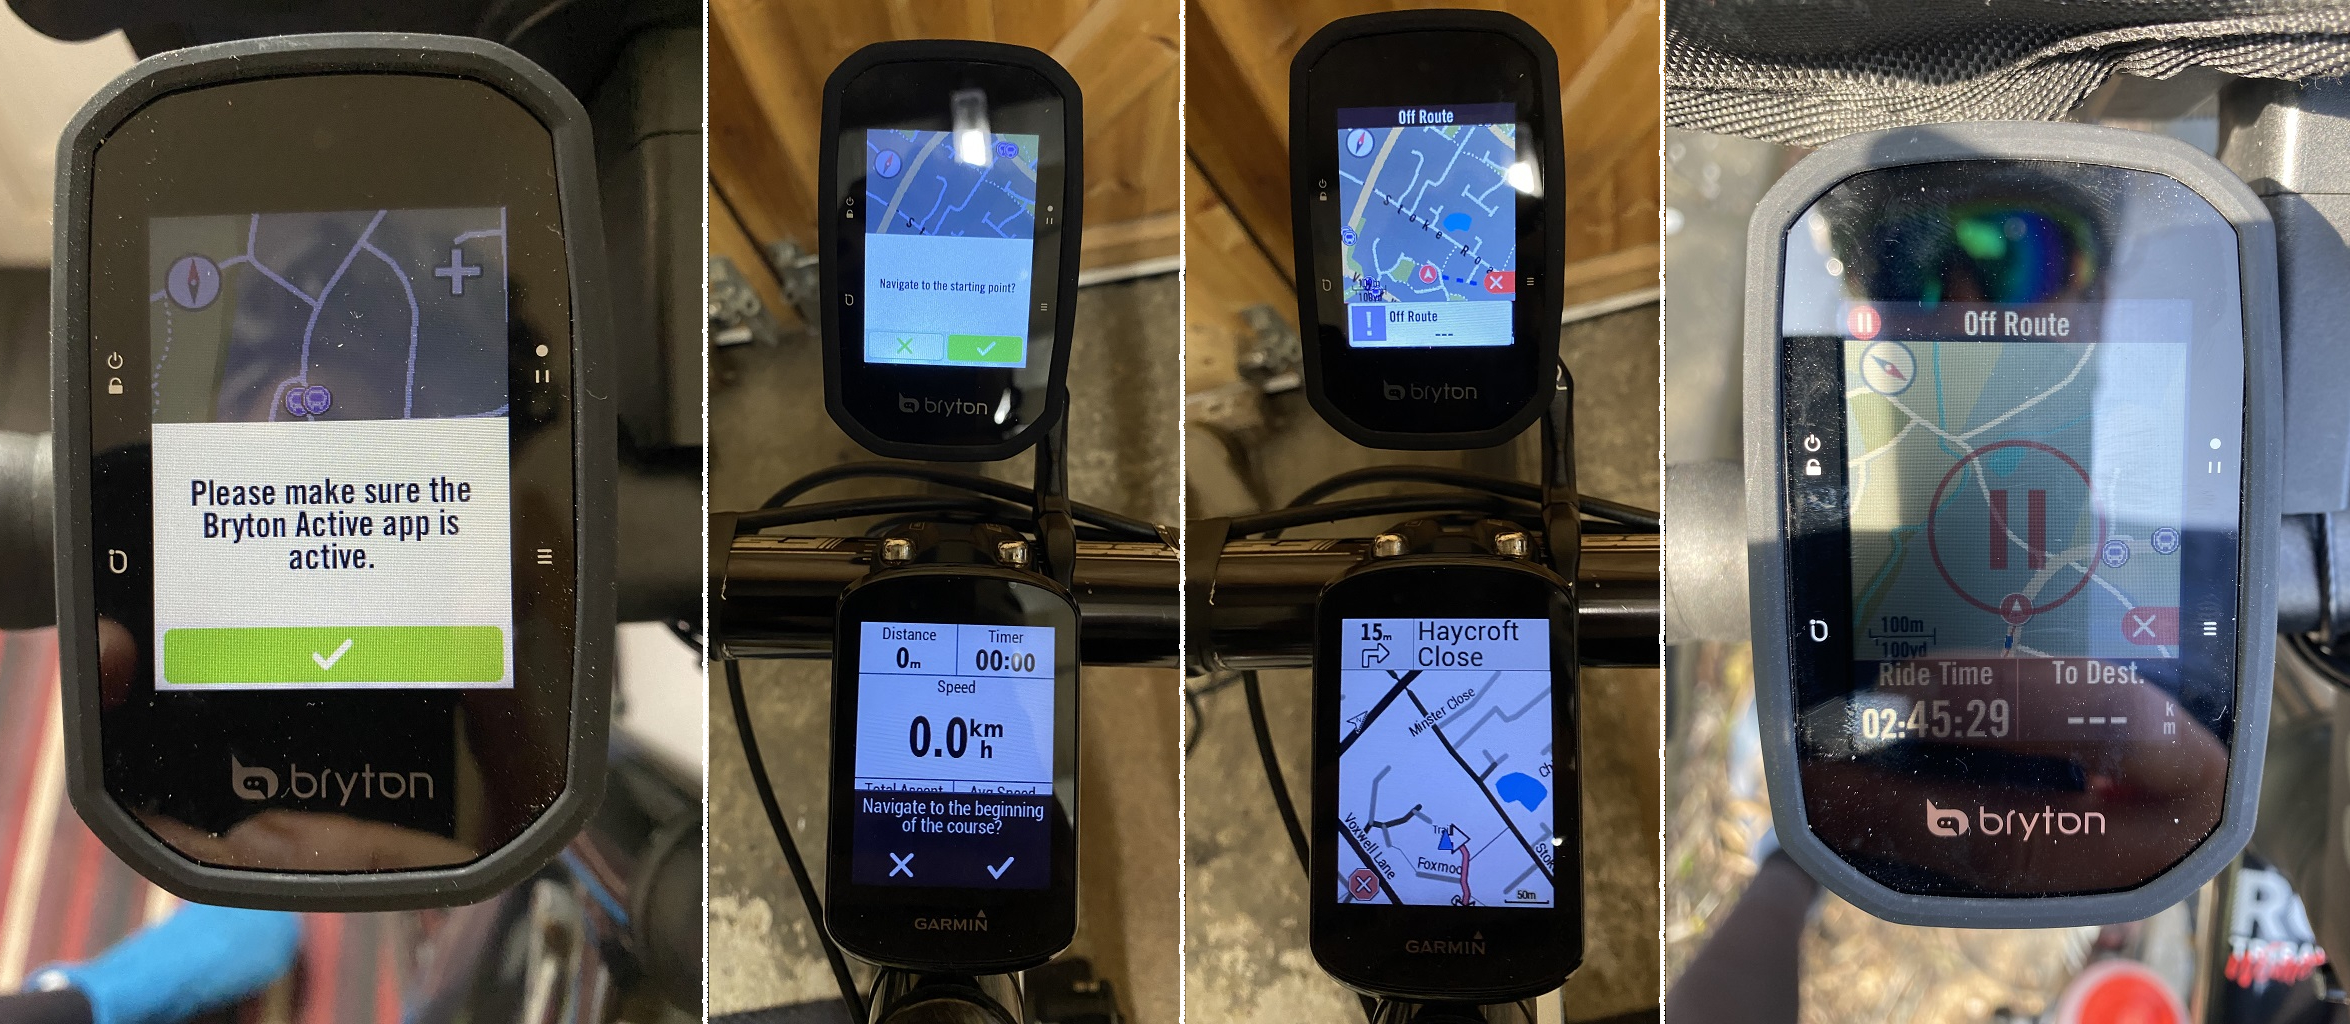 Navigating without a phone connection